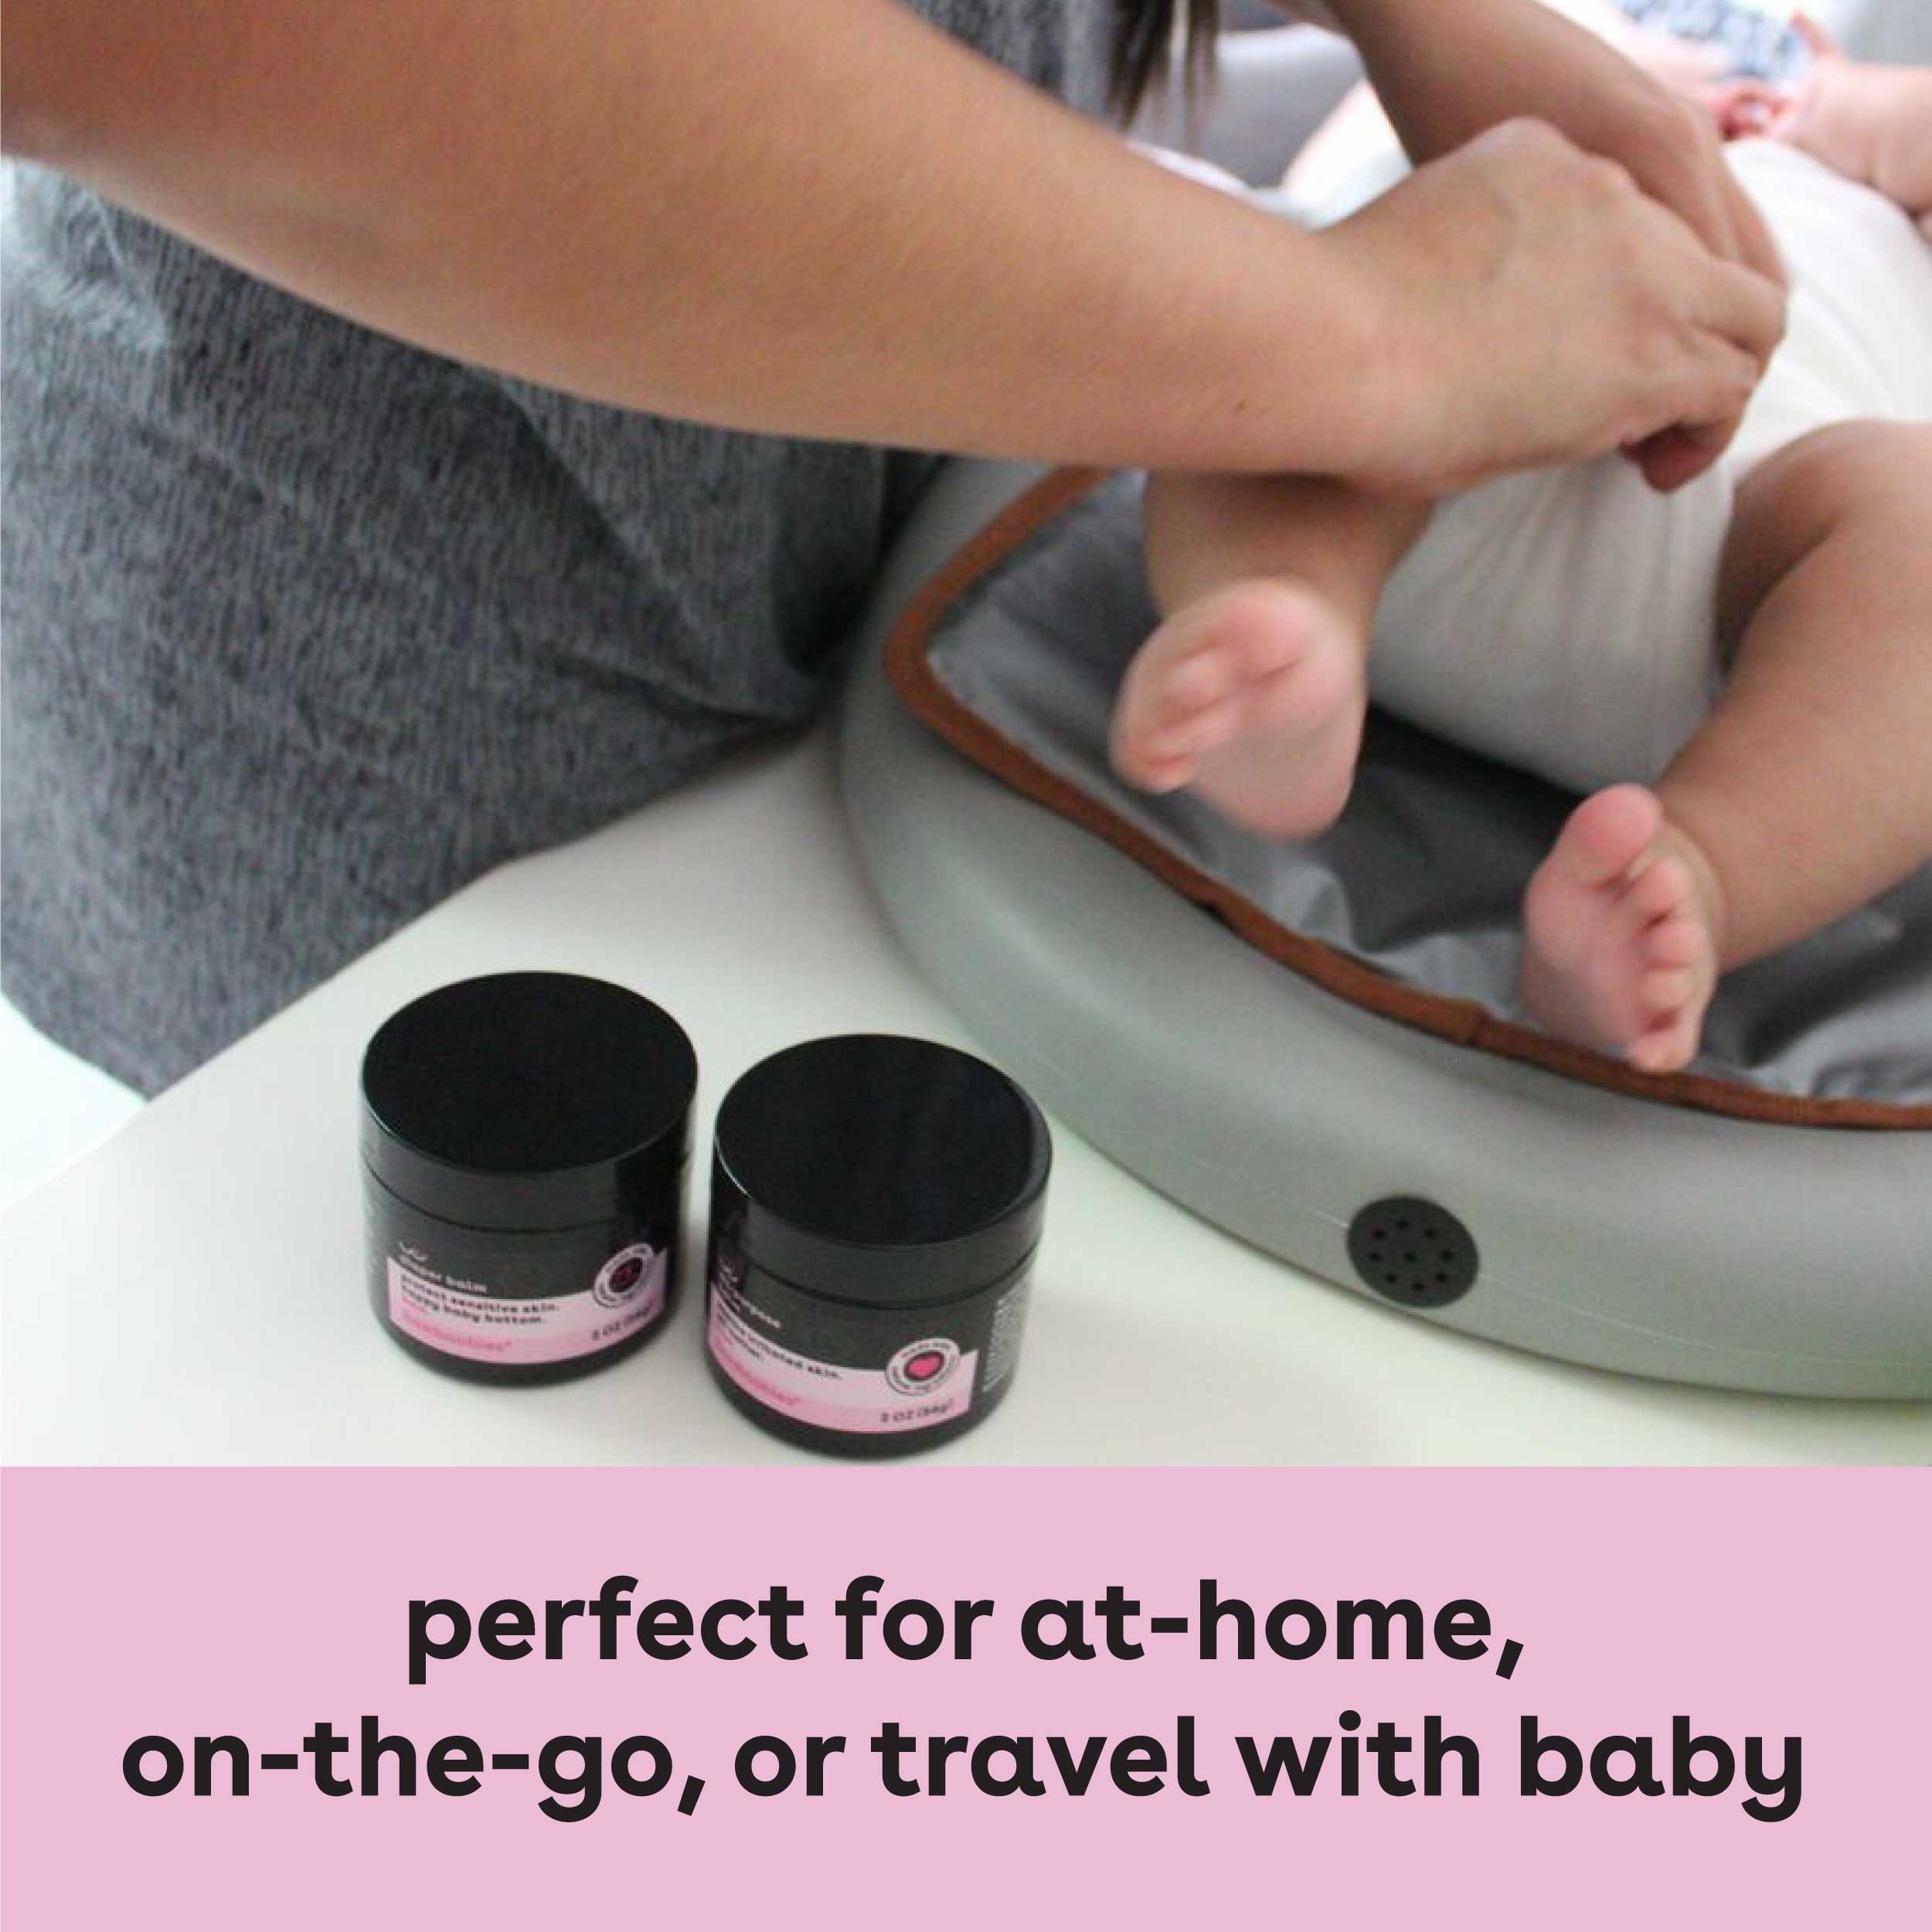 Diaper rash cream is perfect for at-home, on-the-go, or travel with baby